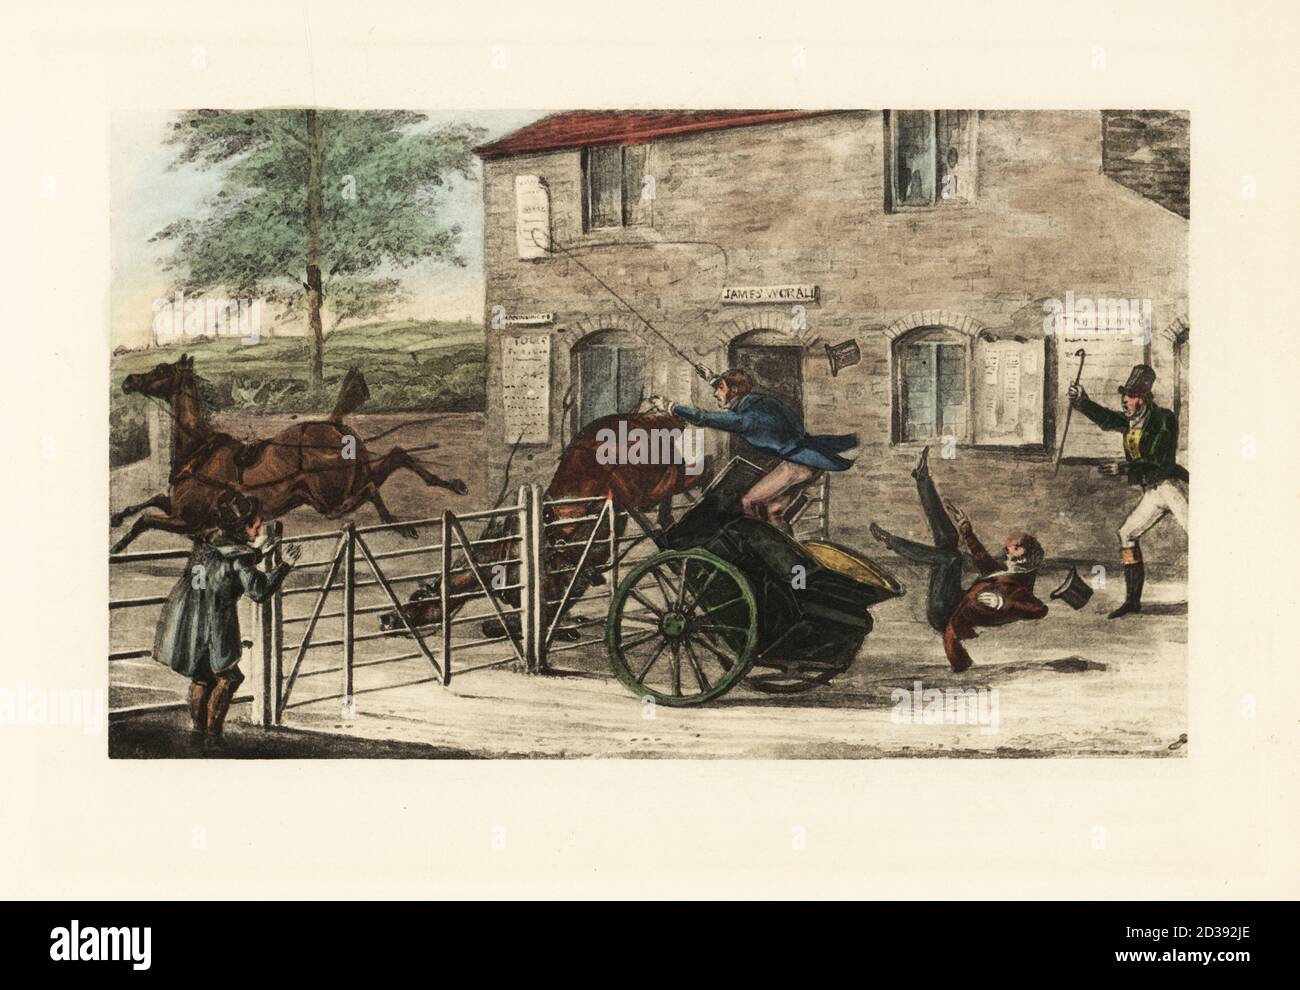 English gentlemen in a two-horse gig trying to jump a toll gate. One horse straddles the turnpike gate, while a passenger falls out the back of the coach. An angry man shakes his stick at the riders. I wonder whether he is a good timber jumper! Chromolithographic facsimile of an illustration by Henry Thomas Alken from Memoirs of the Life of the Late John Mytton by Nimrod aka Charles James Apperley, Kegan Paul, London, 1900. Stock Photo